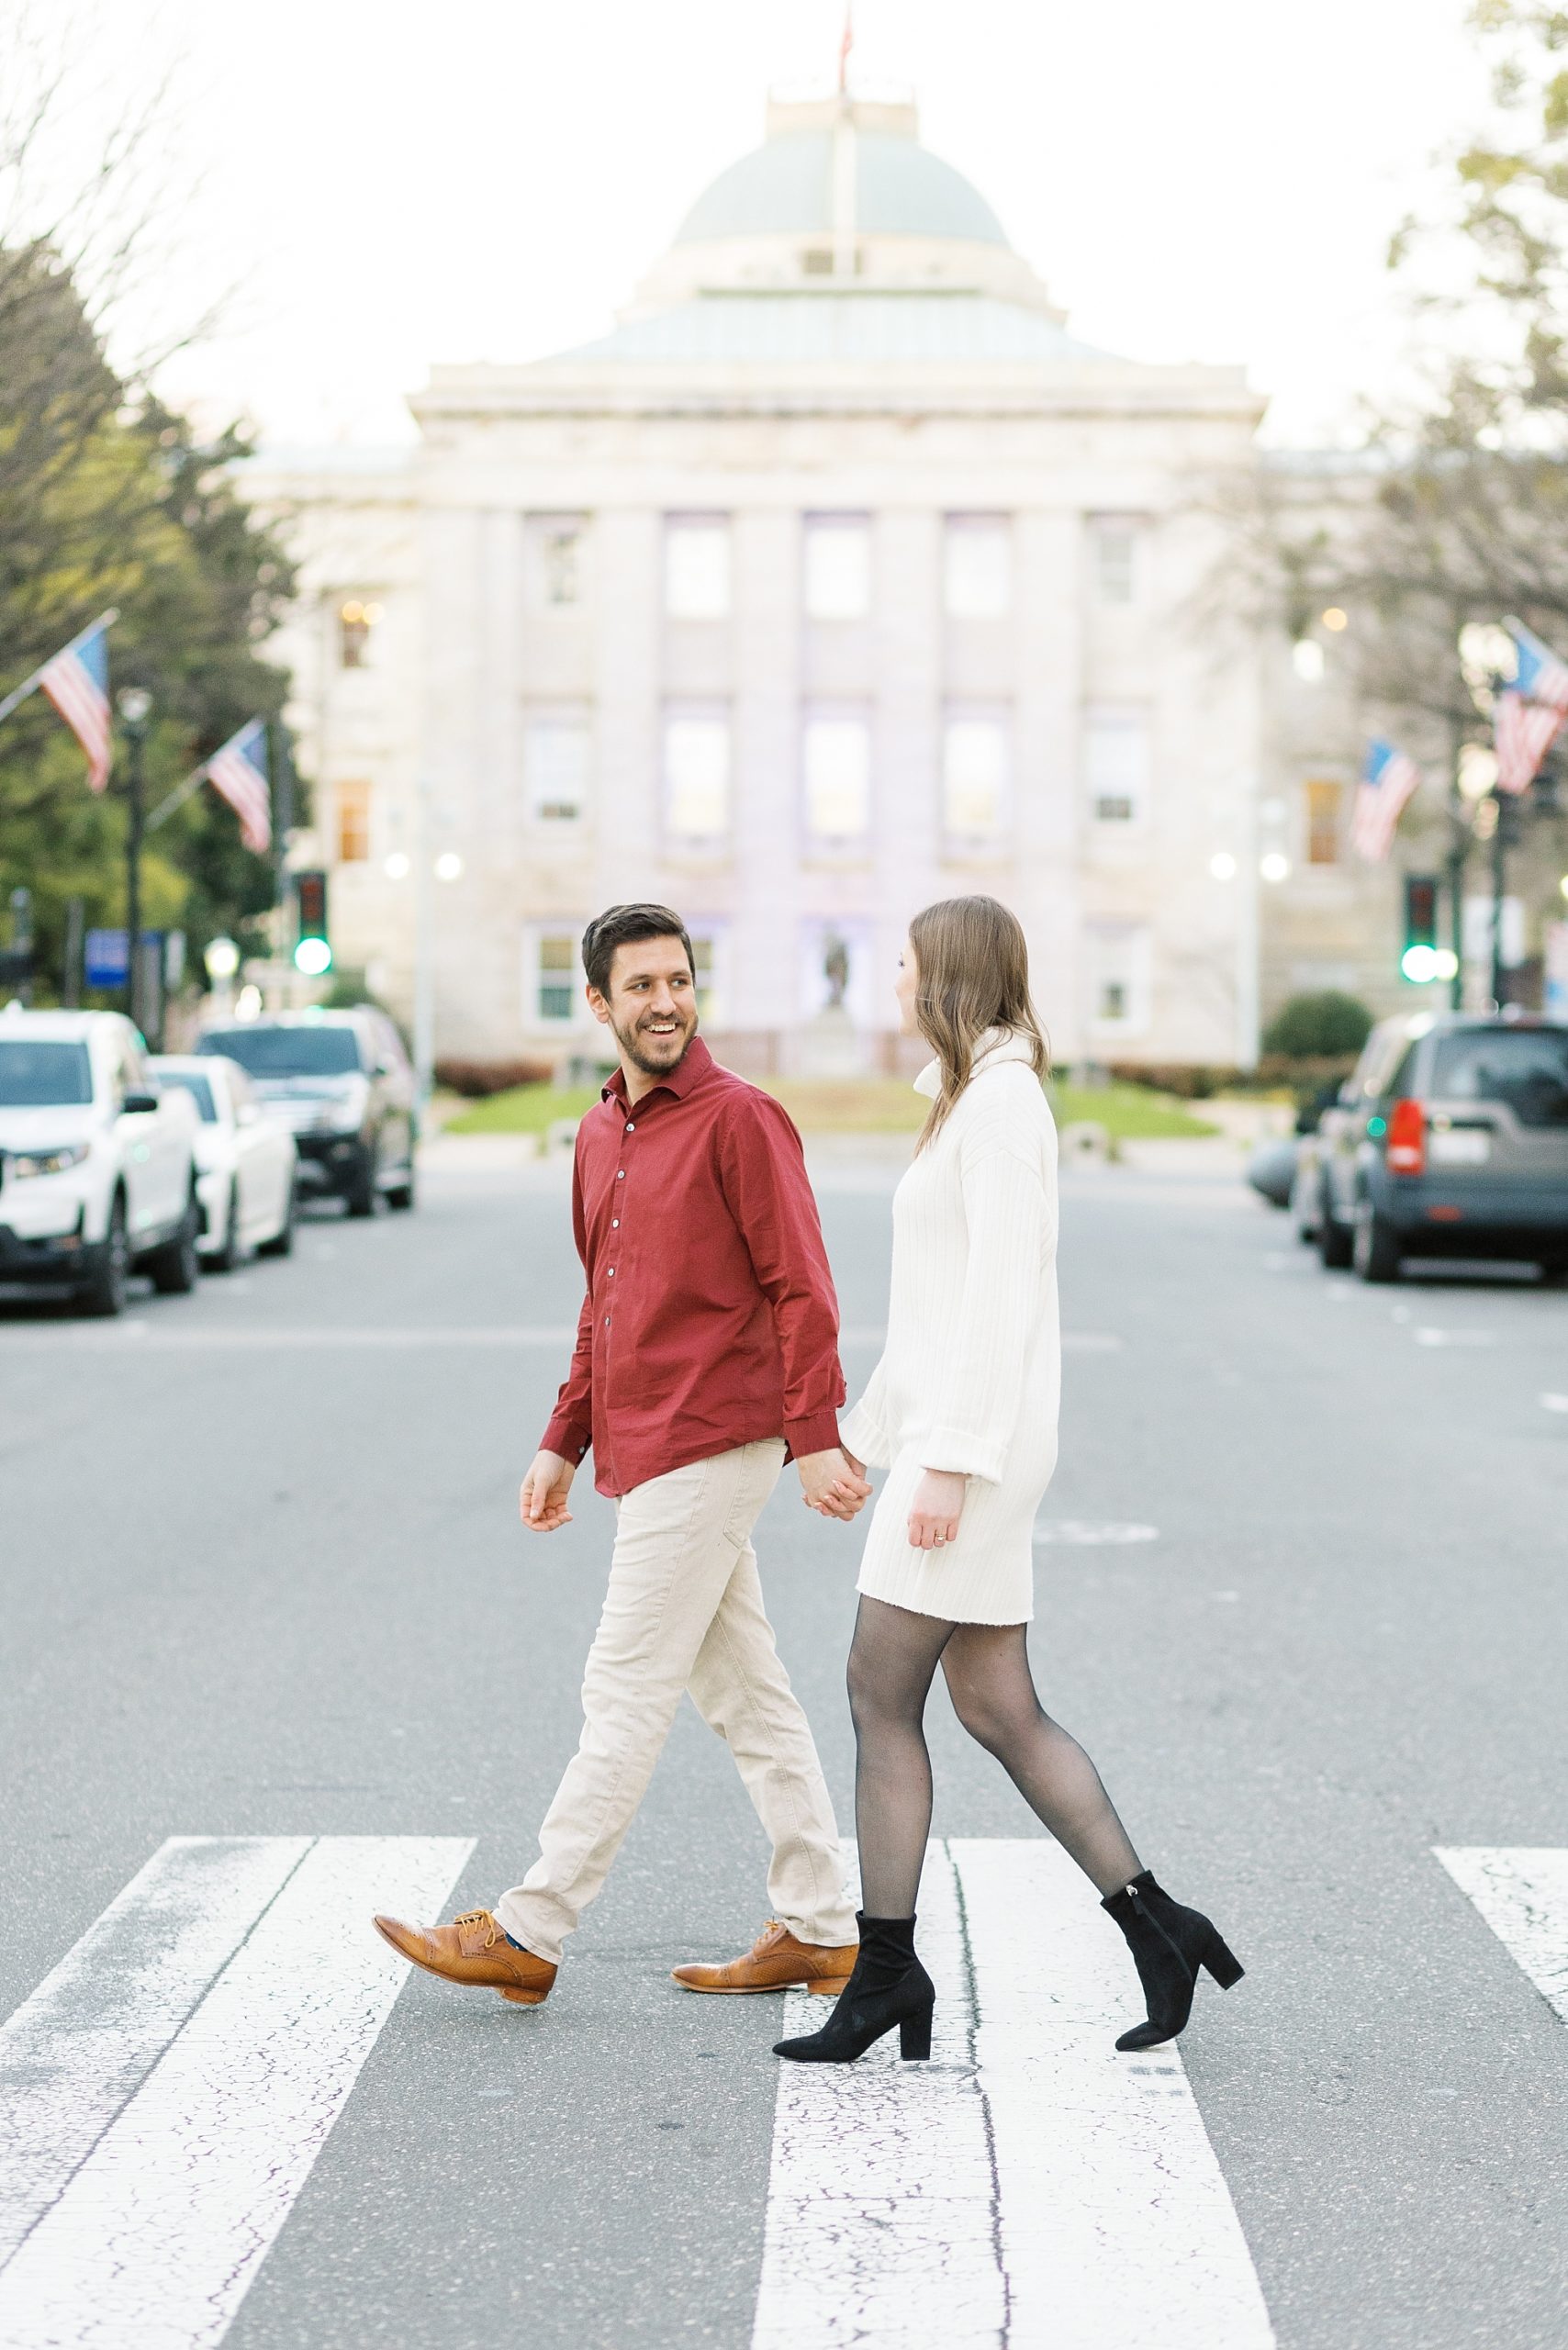 Winter Engagement Photos in Downtown | Raleigh Wedding Photographer